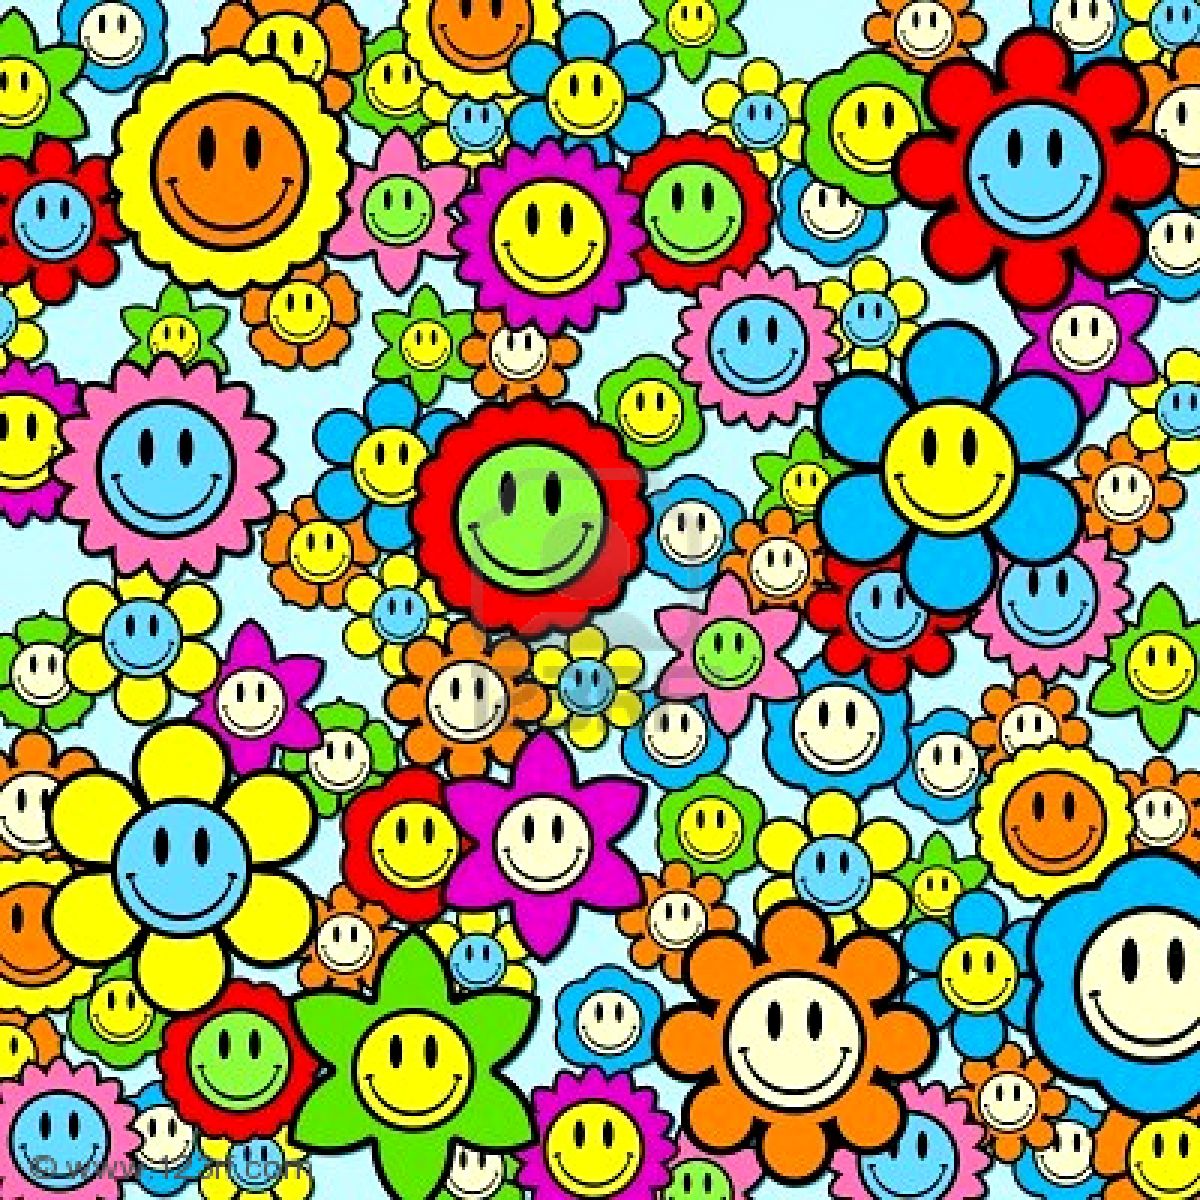 Live Wallpaper Facefaces Green Background Blue Files Smiley